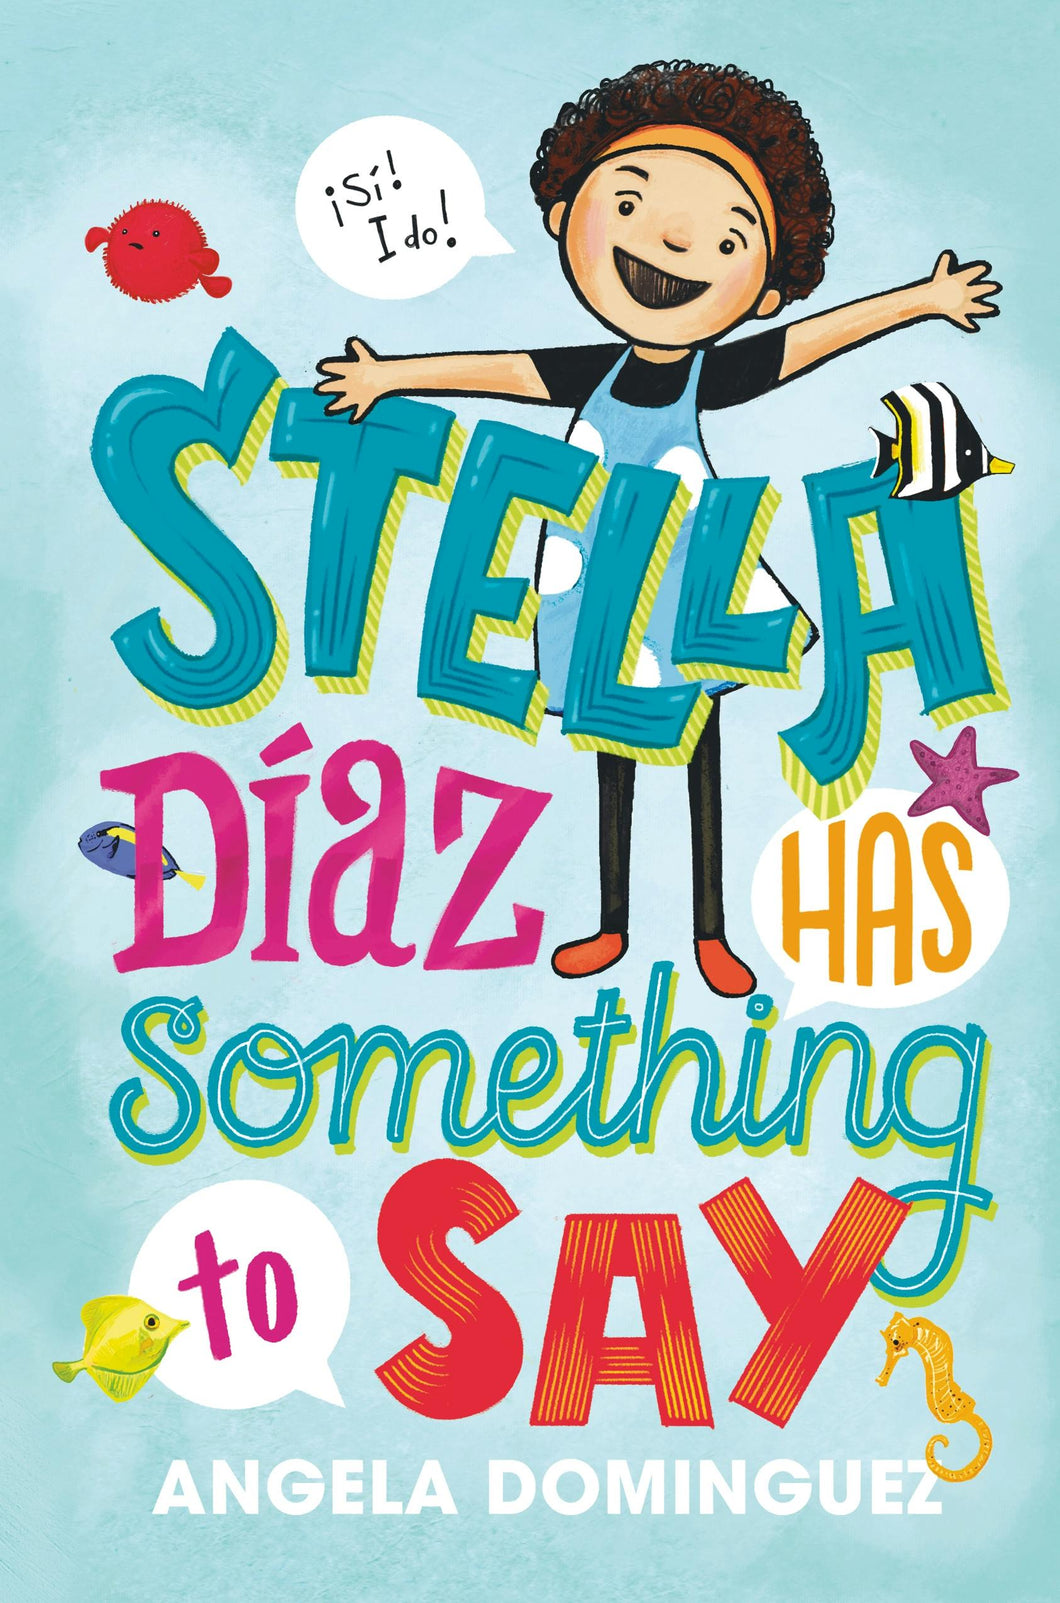 Stella Díaz Has Something to Say(Concord Hill School Donation - G3 Classroom)